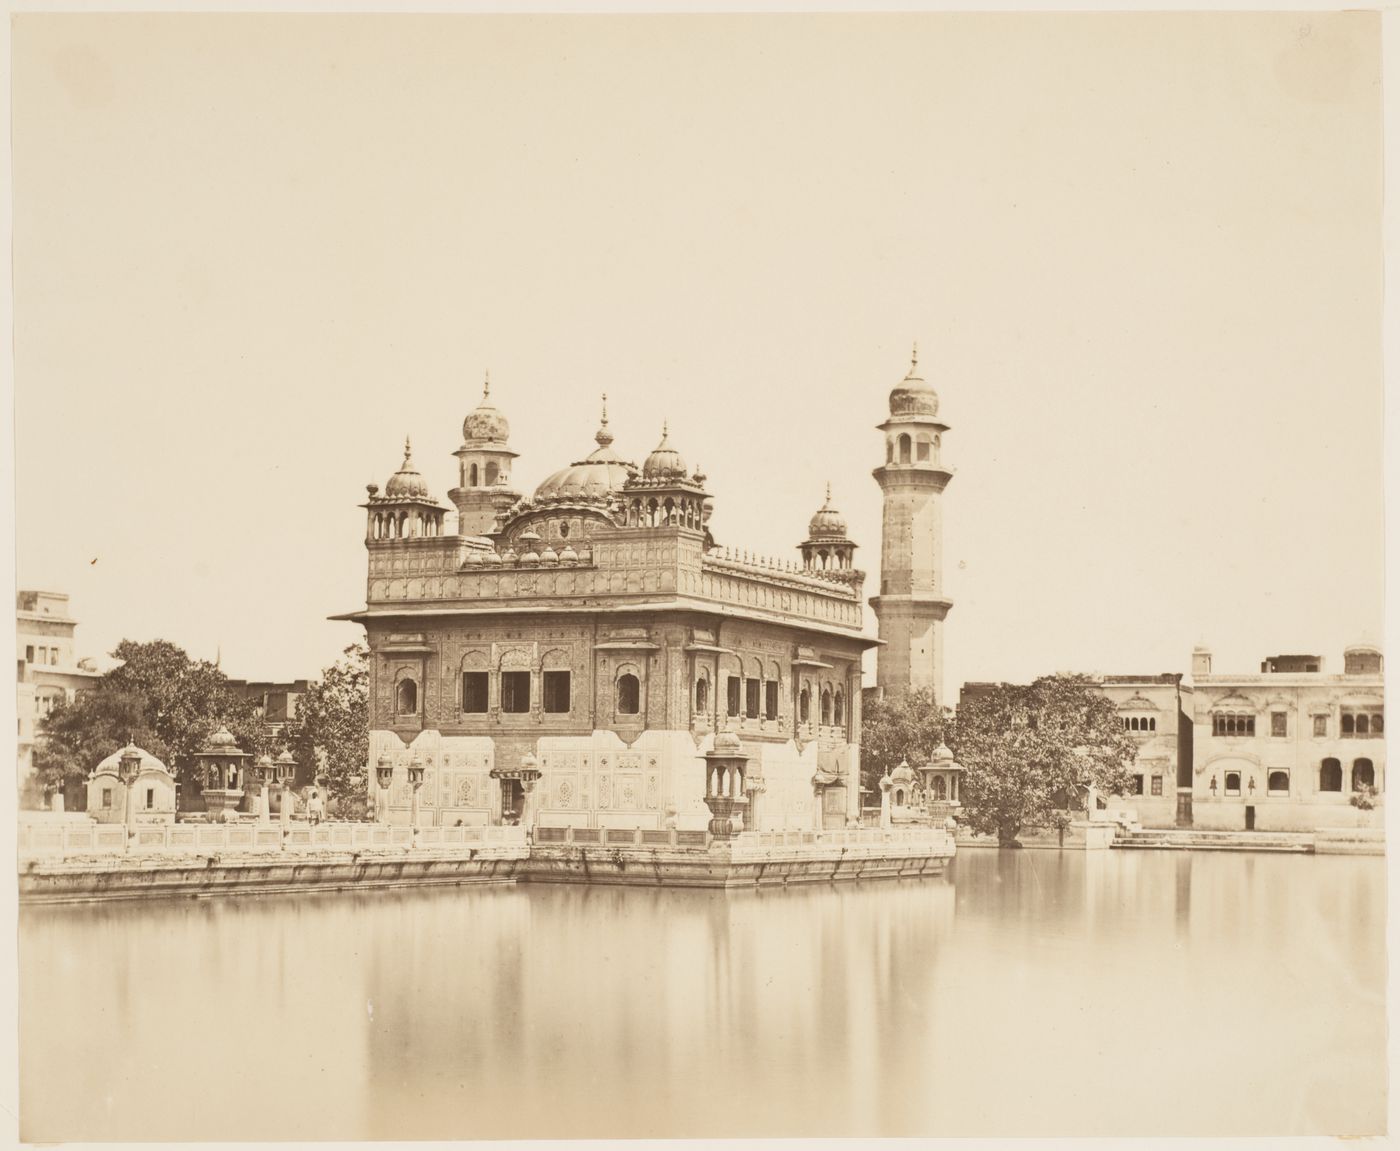 View of the Golden Temple (also known as Darbar Sahib), Amritsar, India